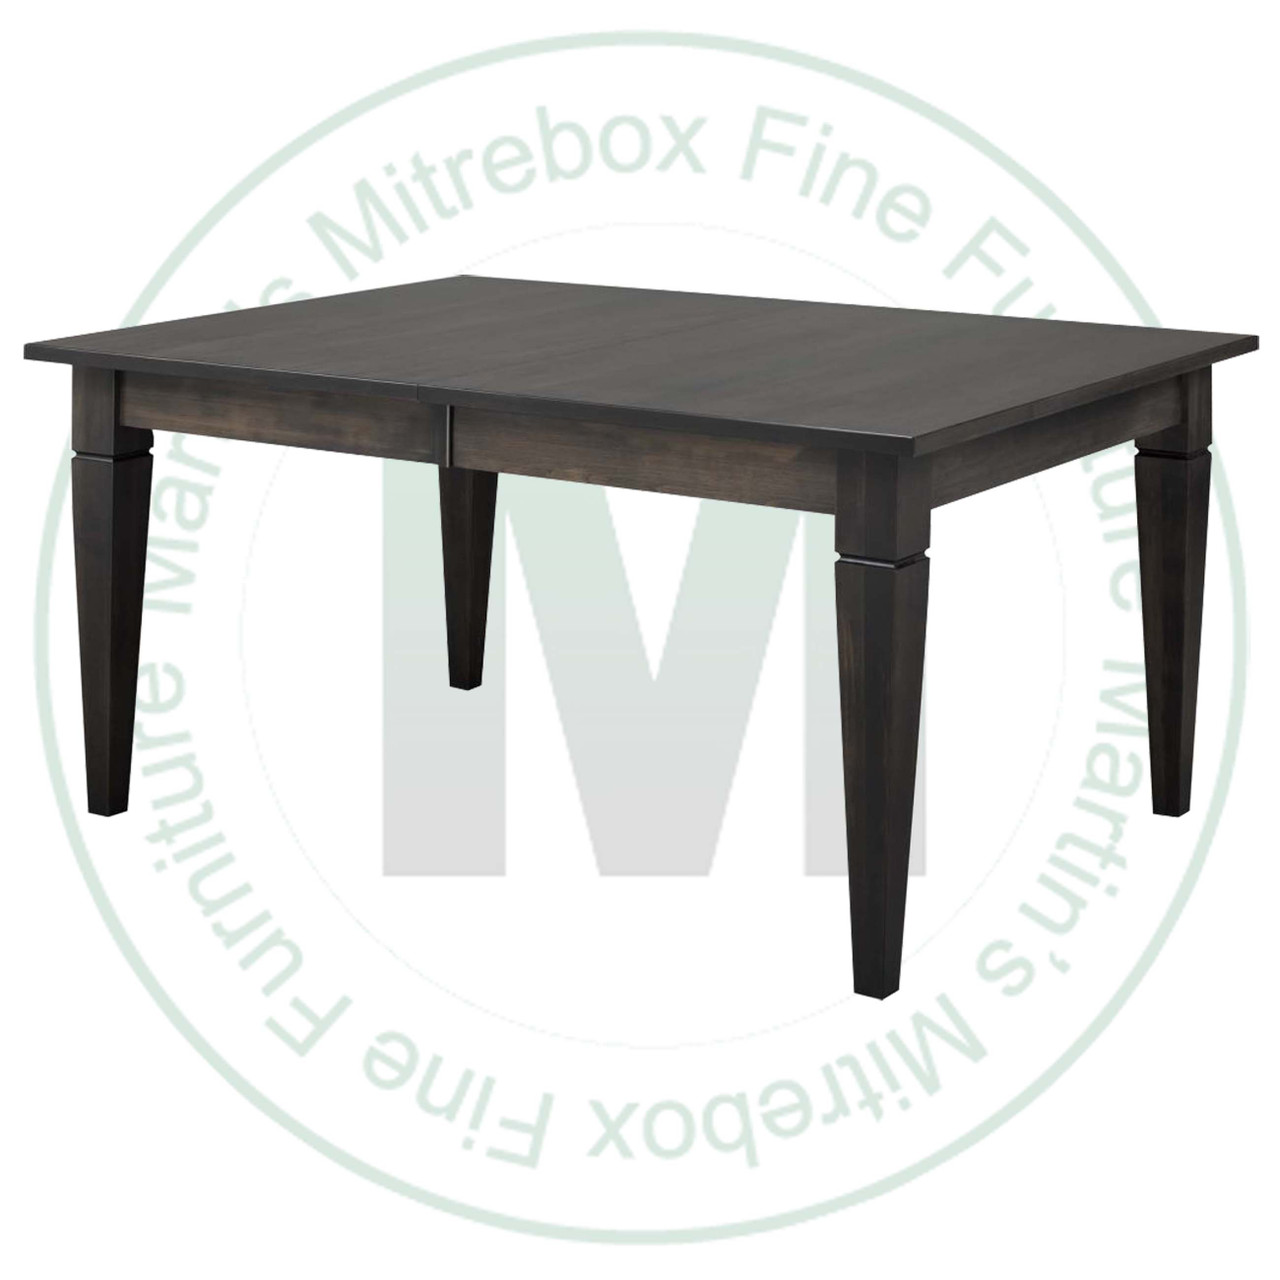 Wormy Maple Reesor Solid Top Harvest Table 48''D x 84''W x 30''H Table Has 1.25'' Thick Top And 2 - 16'' Extensions